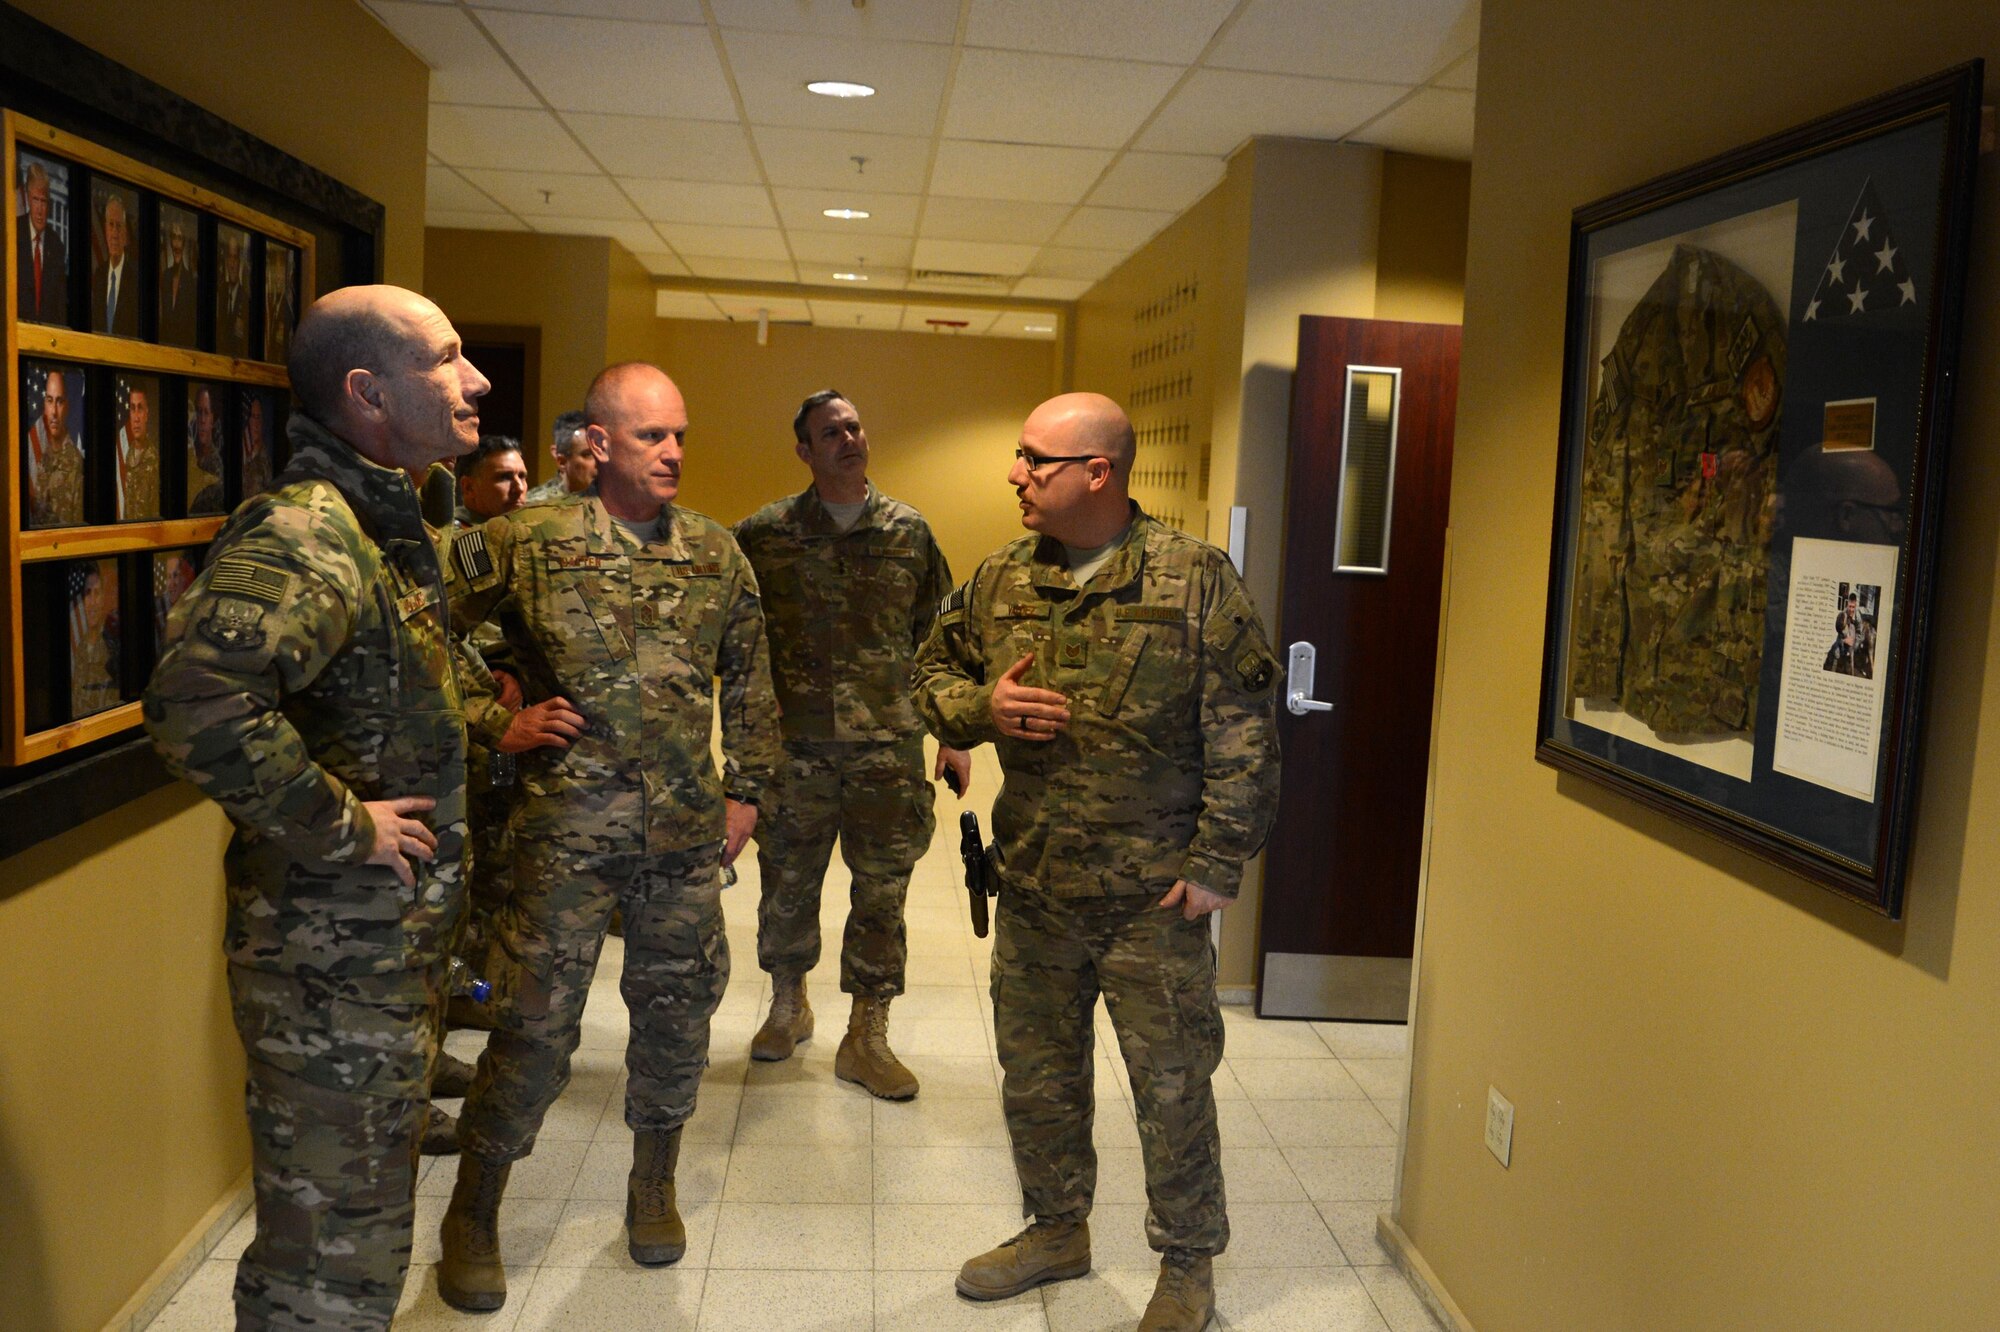 Gen. Mike Holmes, commander of Air Combat Command, and Chief Master Sgt. Frank Batten, ACC command chief, receives a Heritage Room brief from Tech. Sgt. Jose Valdez, 455th Air Expeditionary Wing command and control controller, Feb. 9, 2018 at Bagram Airfield, Afghanistan.